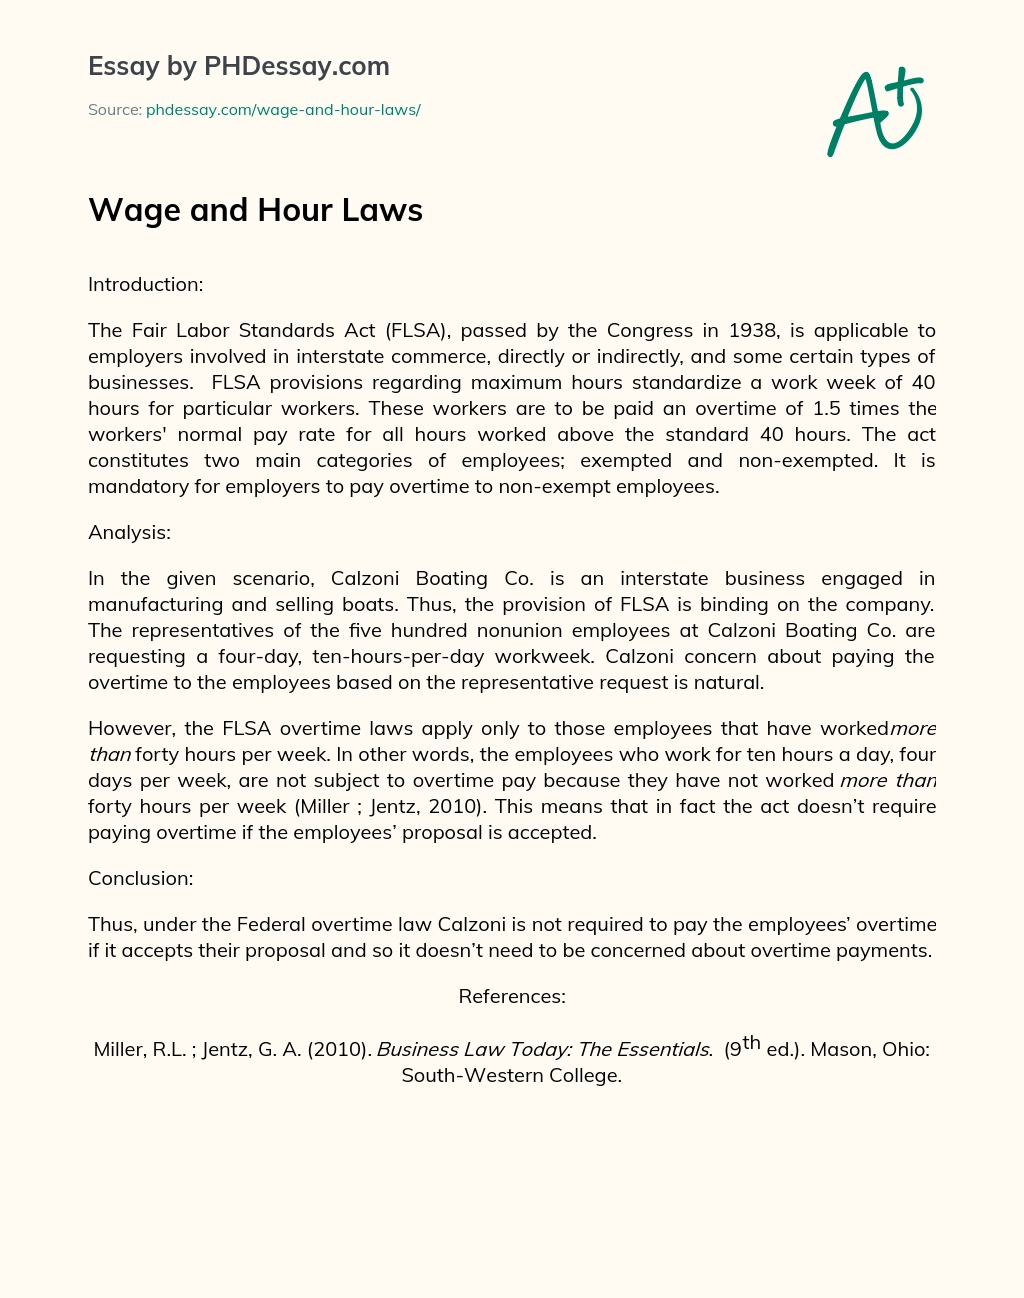 Wage and Hour Laws essay